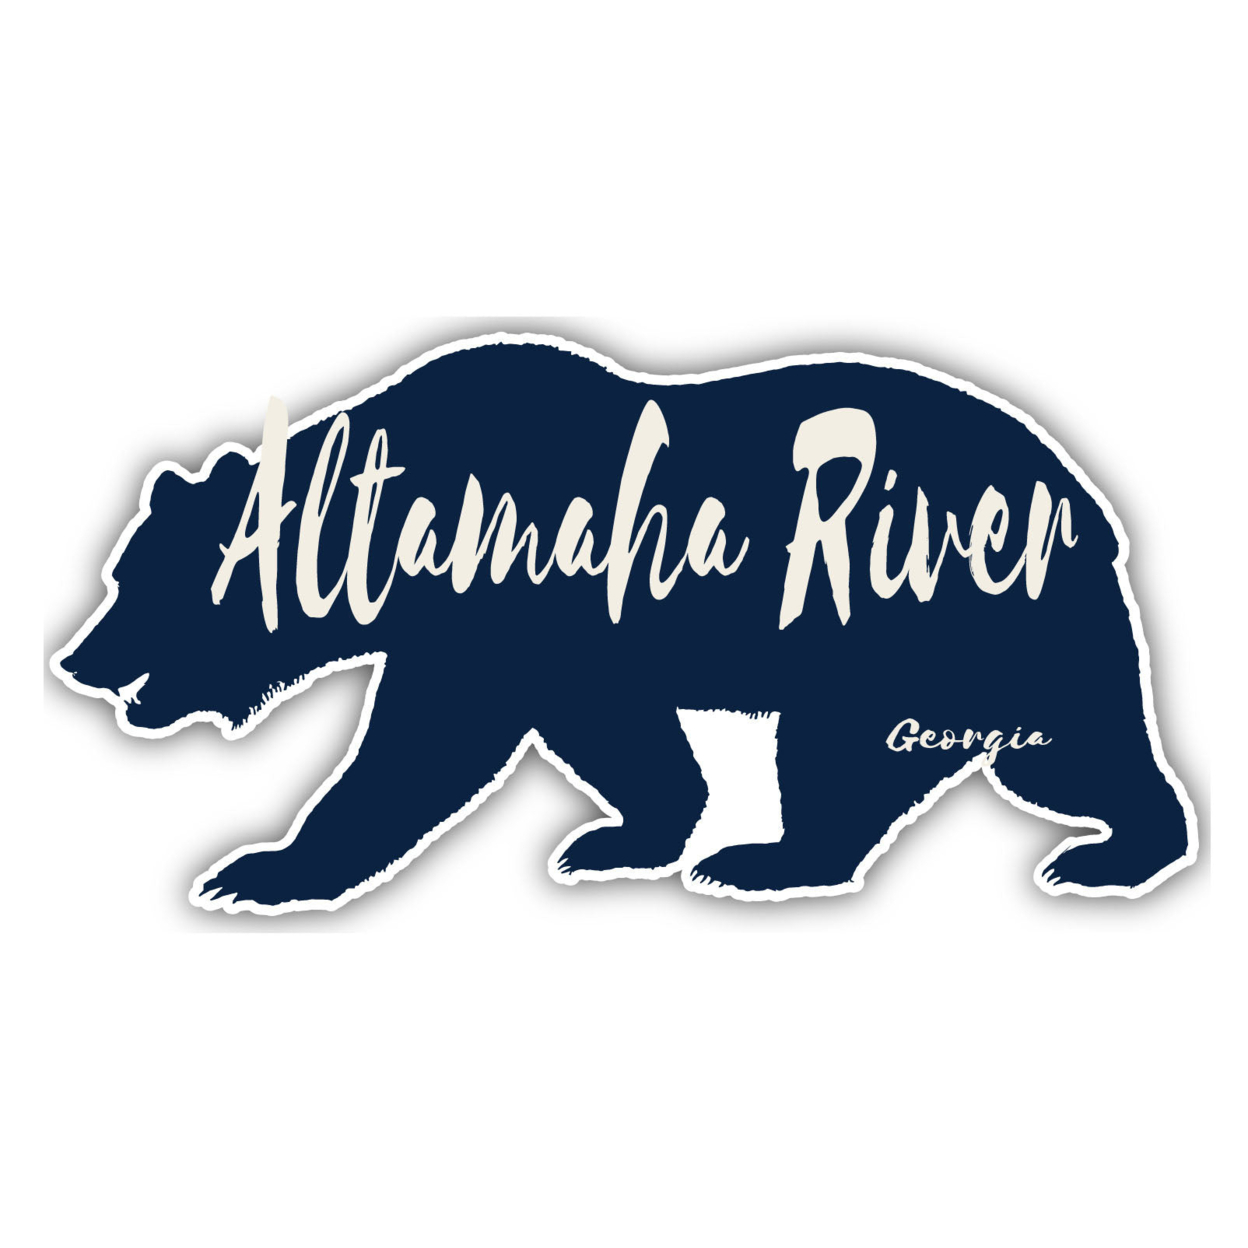 Altamaha River Georgia Souvenir Decorative Stickers (Choose Theme And Size) - 4-Pack, 10-Inch, Great Outdoors